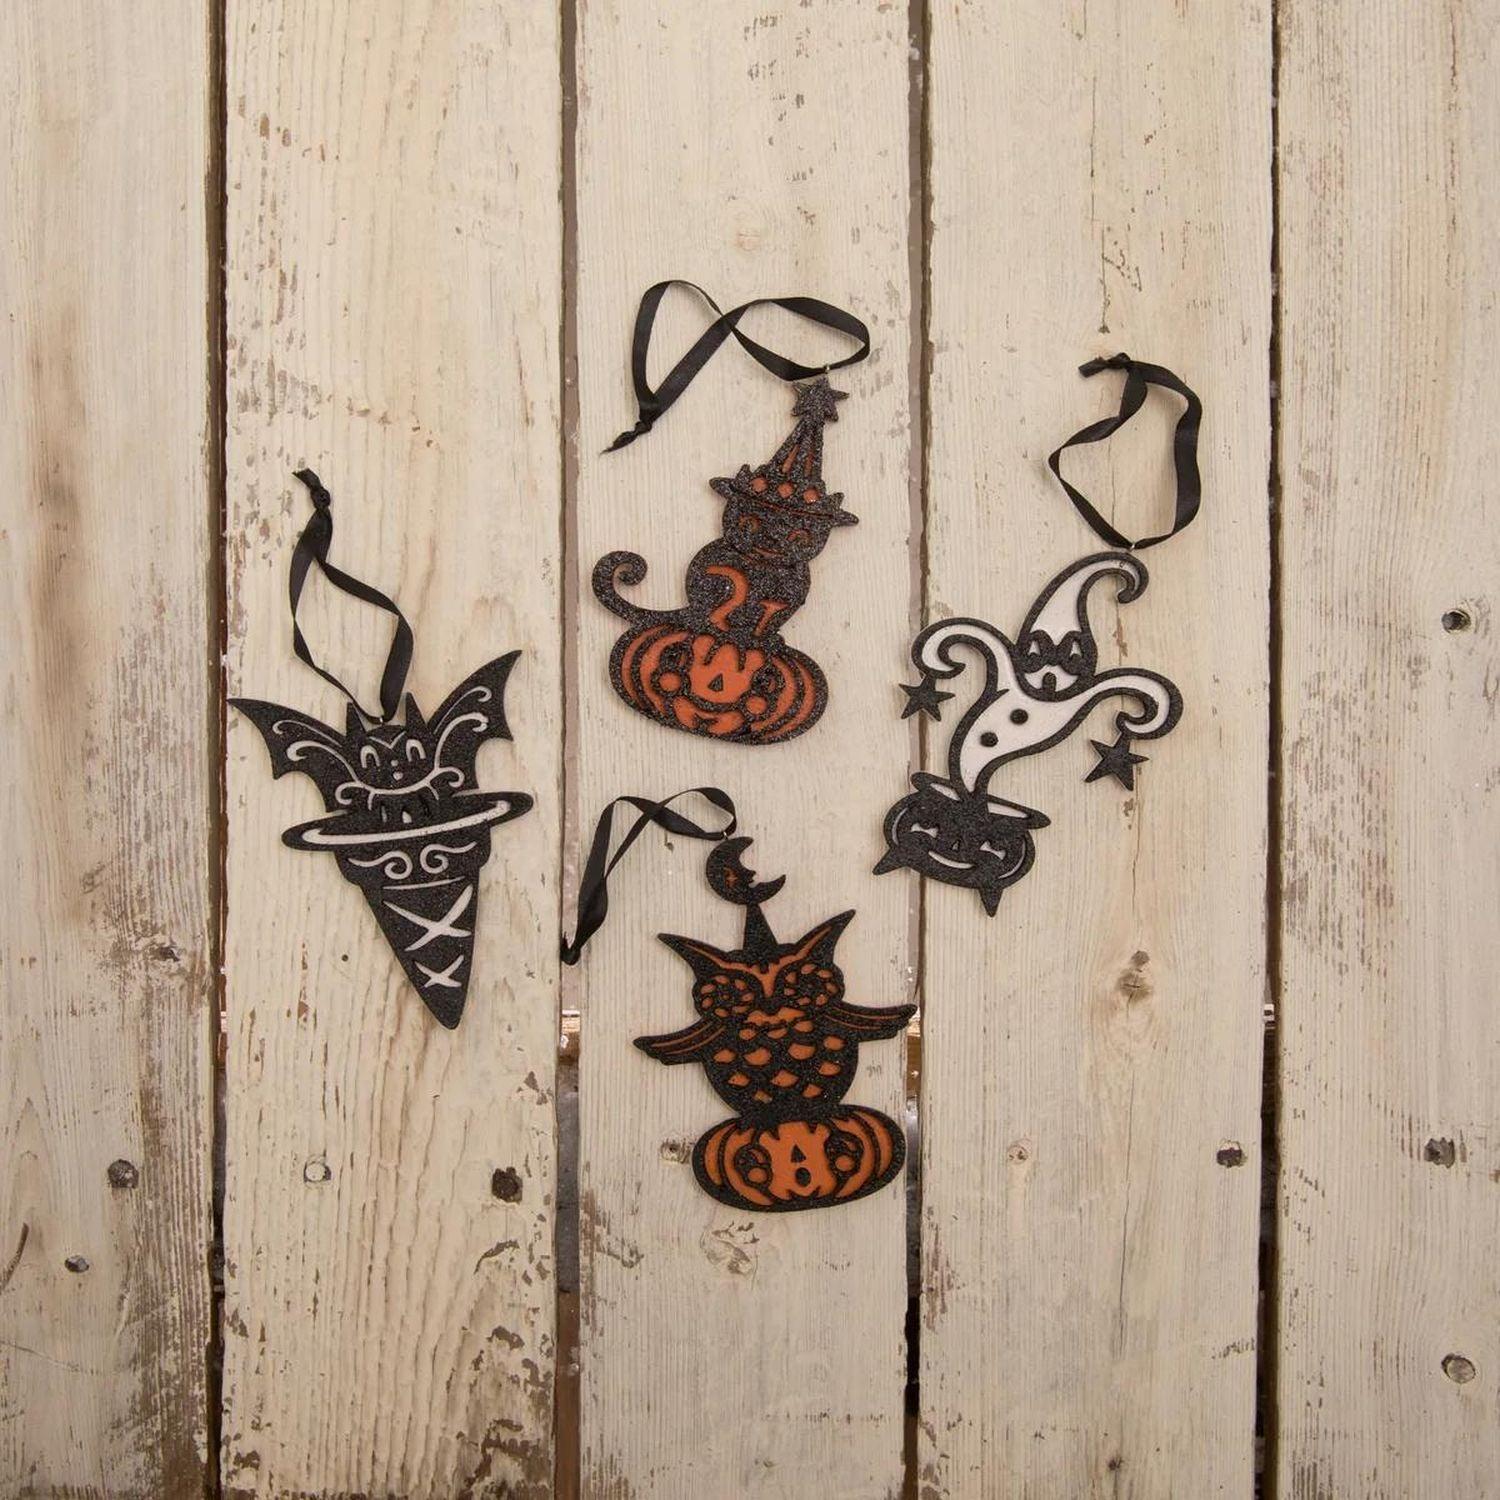 Bethany Lowe Halloween Character Ornaments, Set Of 4 by Bethany Lowe